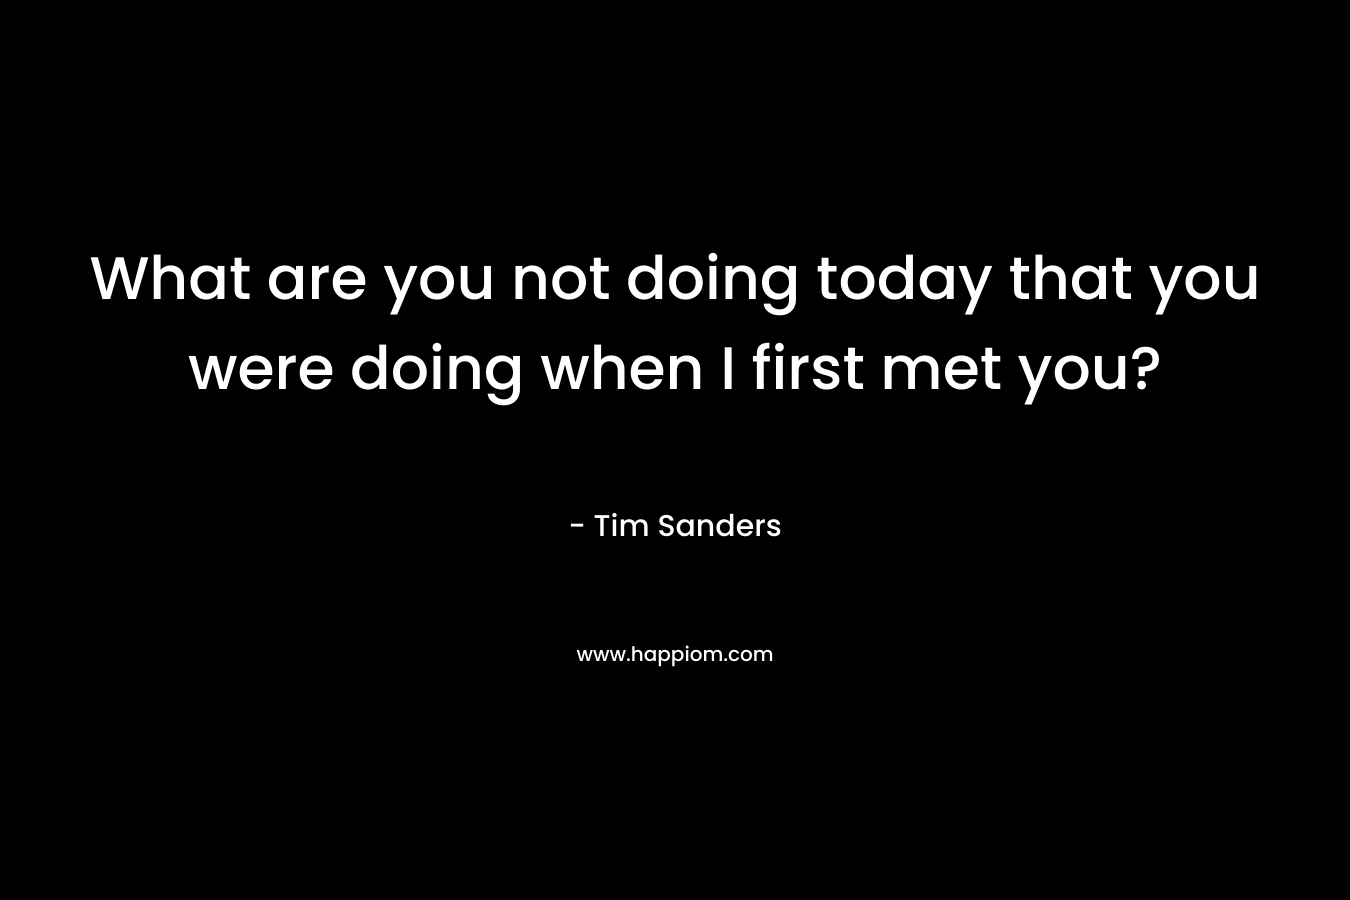 What are you not doing today that you were doing when I first met you? – Tim Sanders